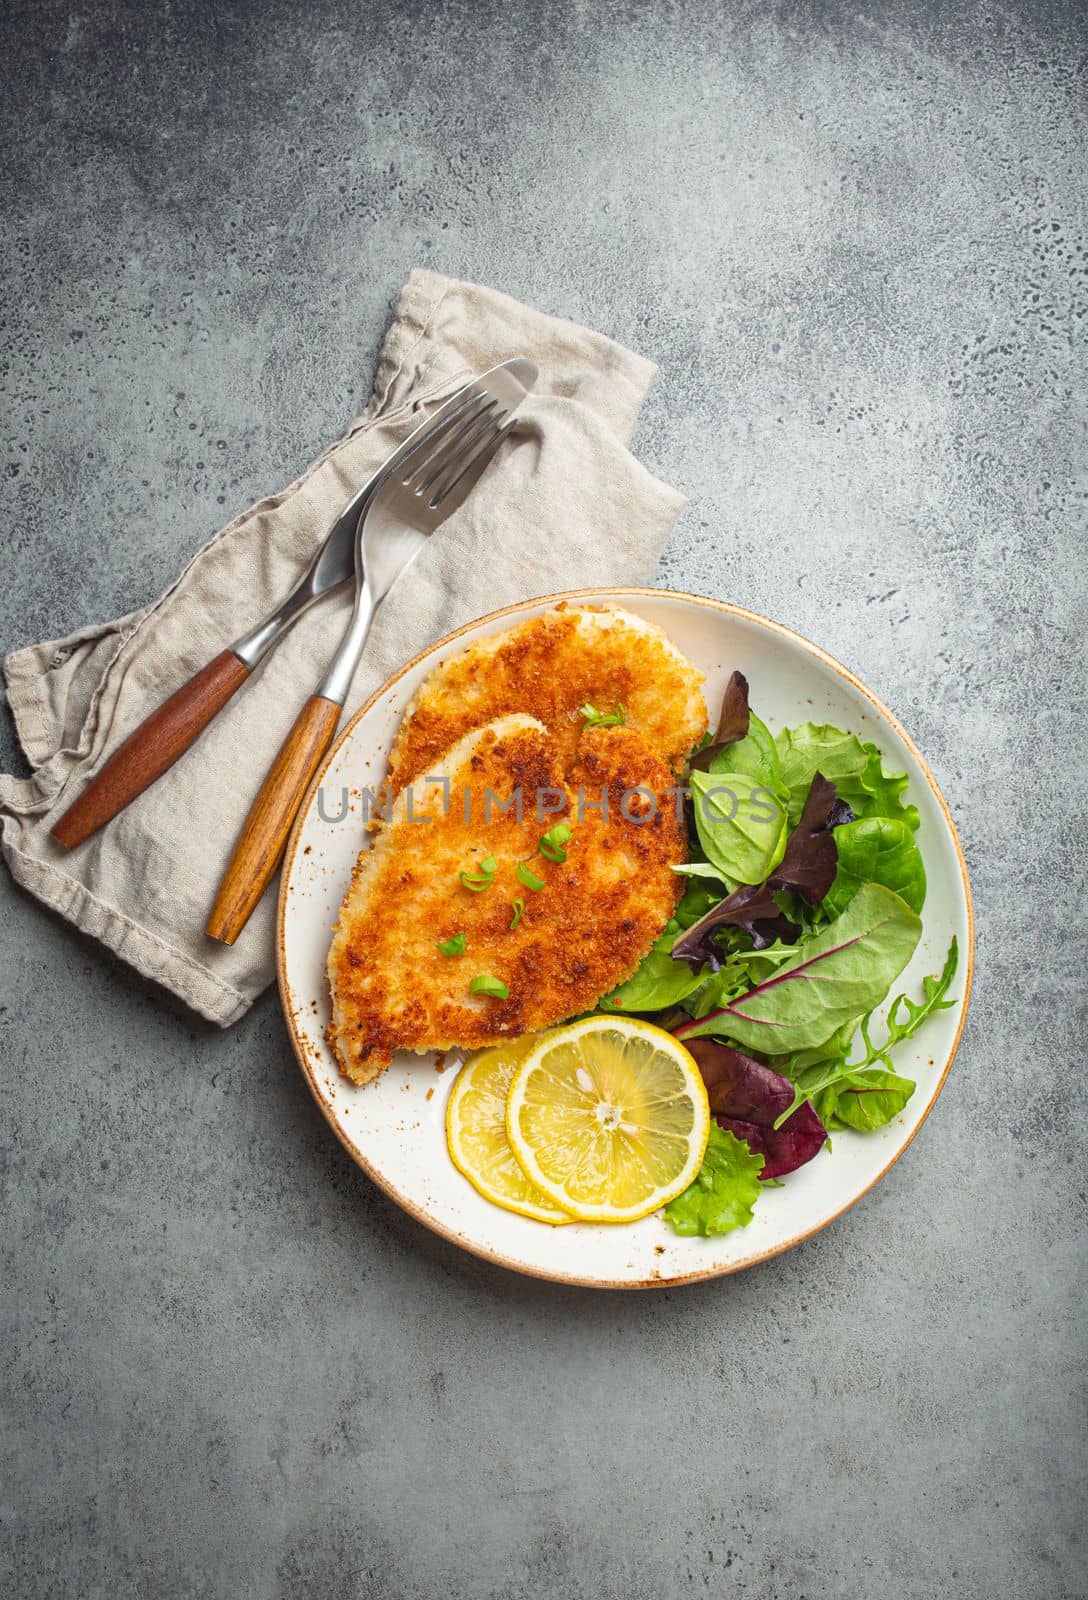 Crispy panko breaded fried chicken fillet with green salad and lemon on plate with cutlery on gray rustic concrete background table from above. Japanese style deep fried coated chicken breasts .